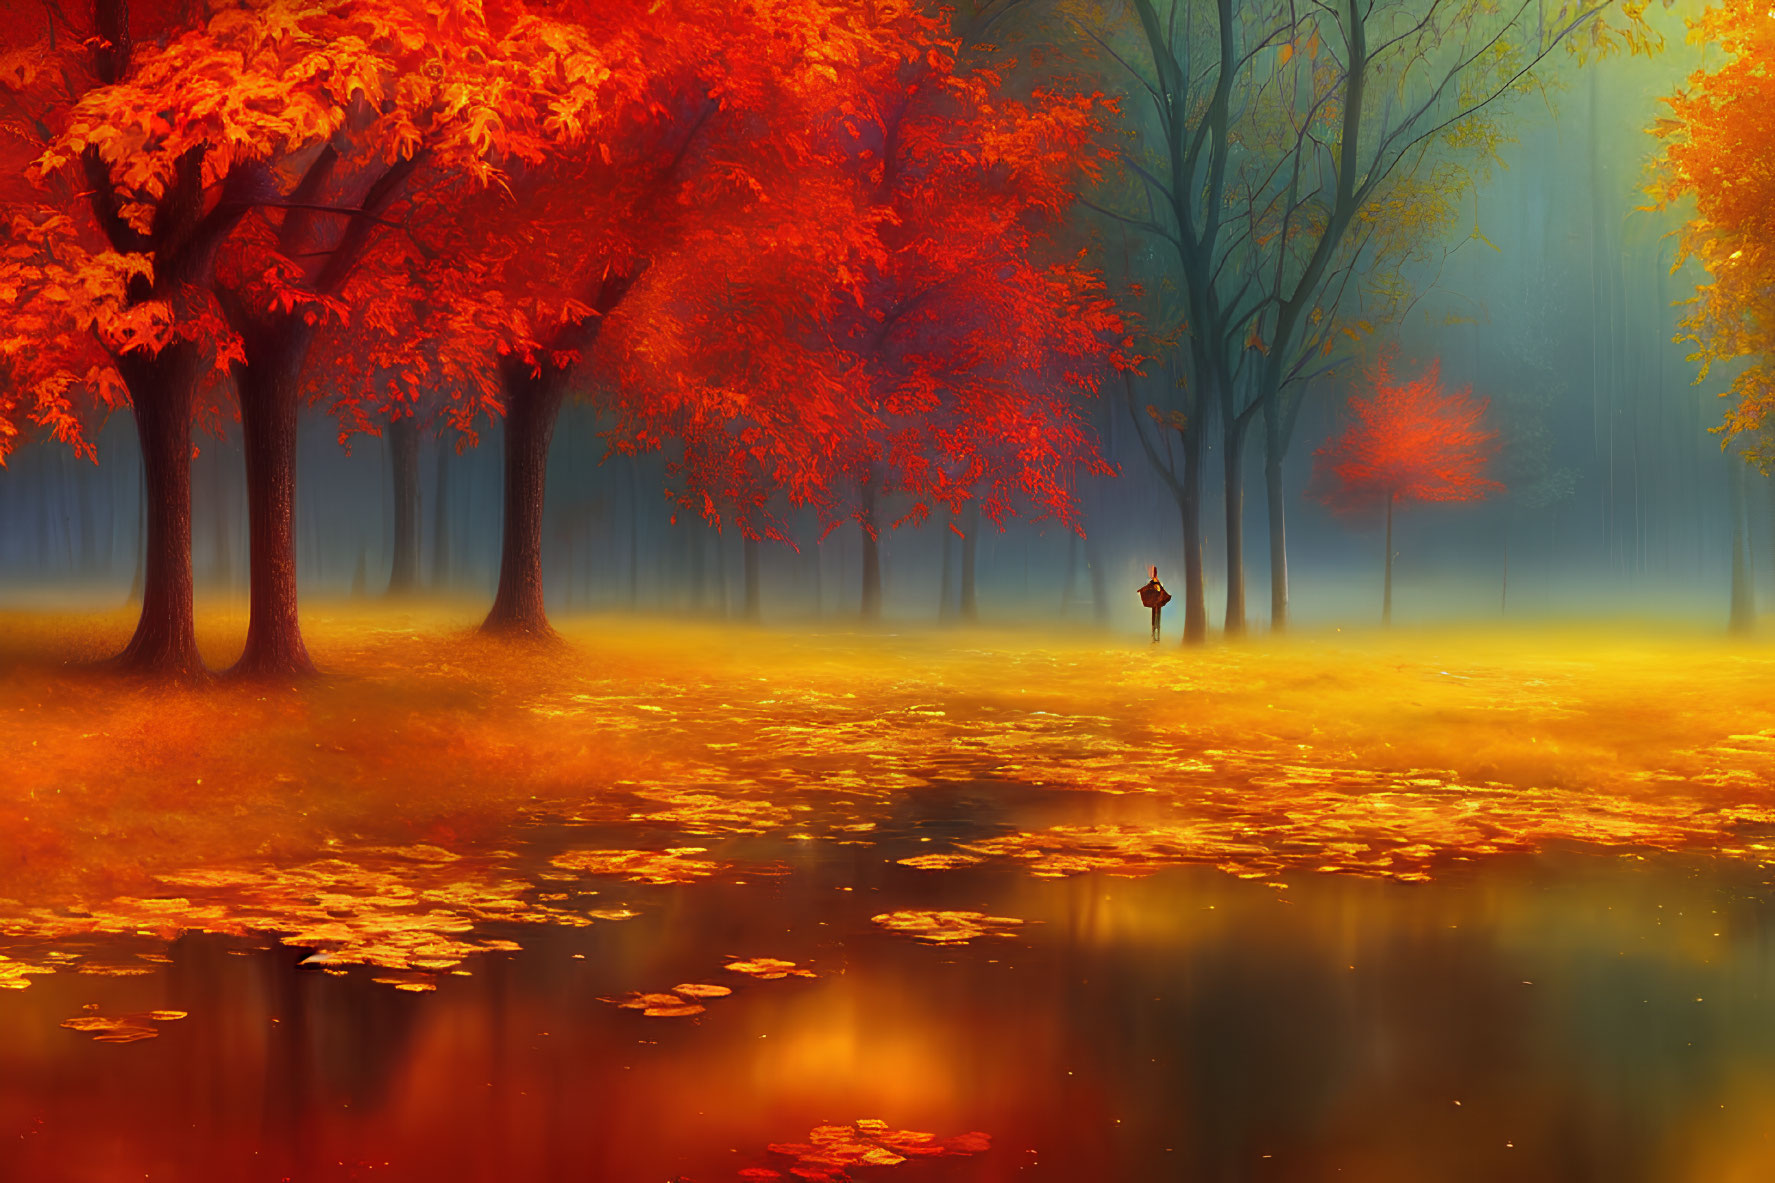 Vibrant autumn landscape with red-orange trees, reflective water, and solitary figure in misty forest